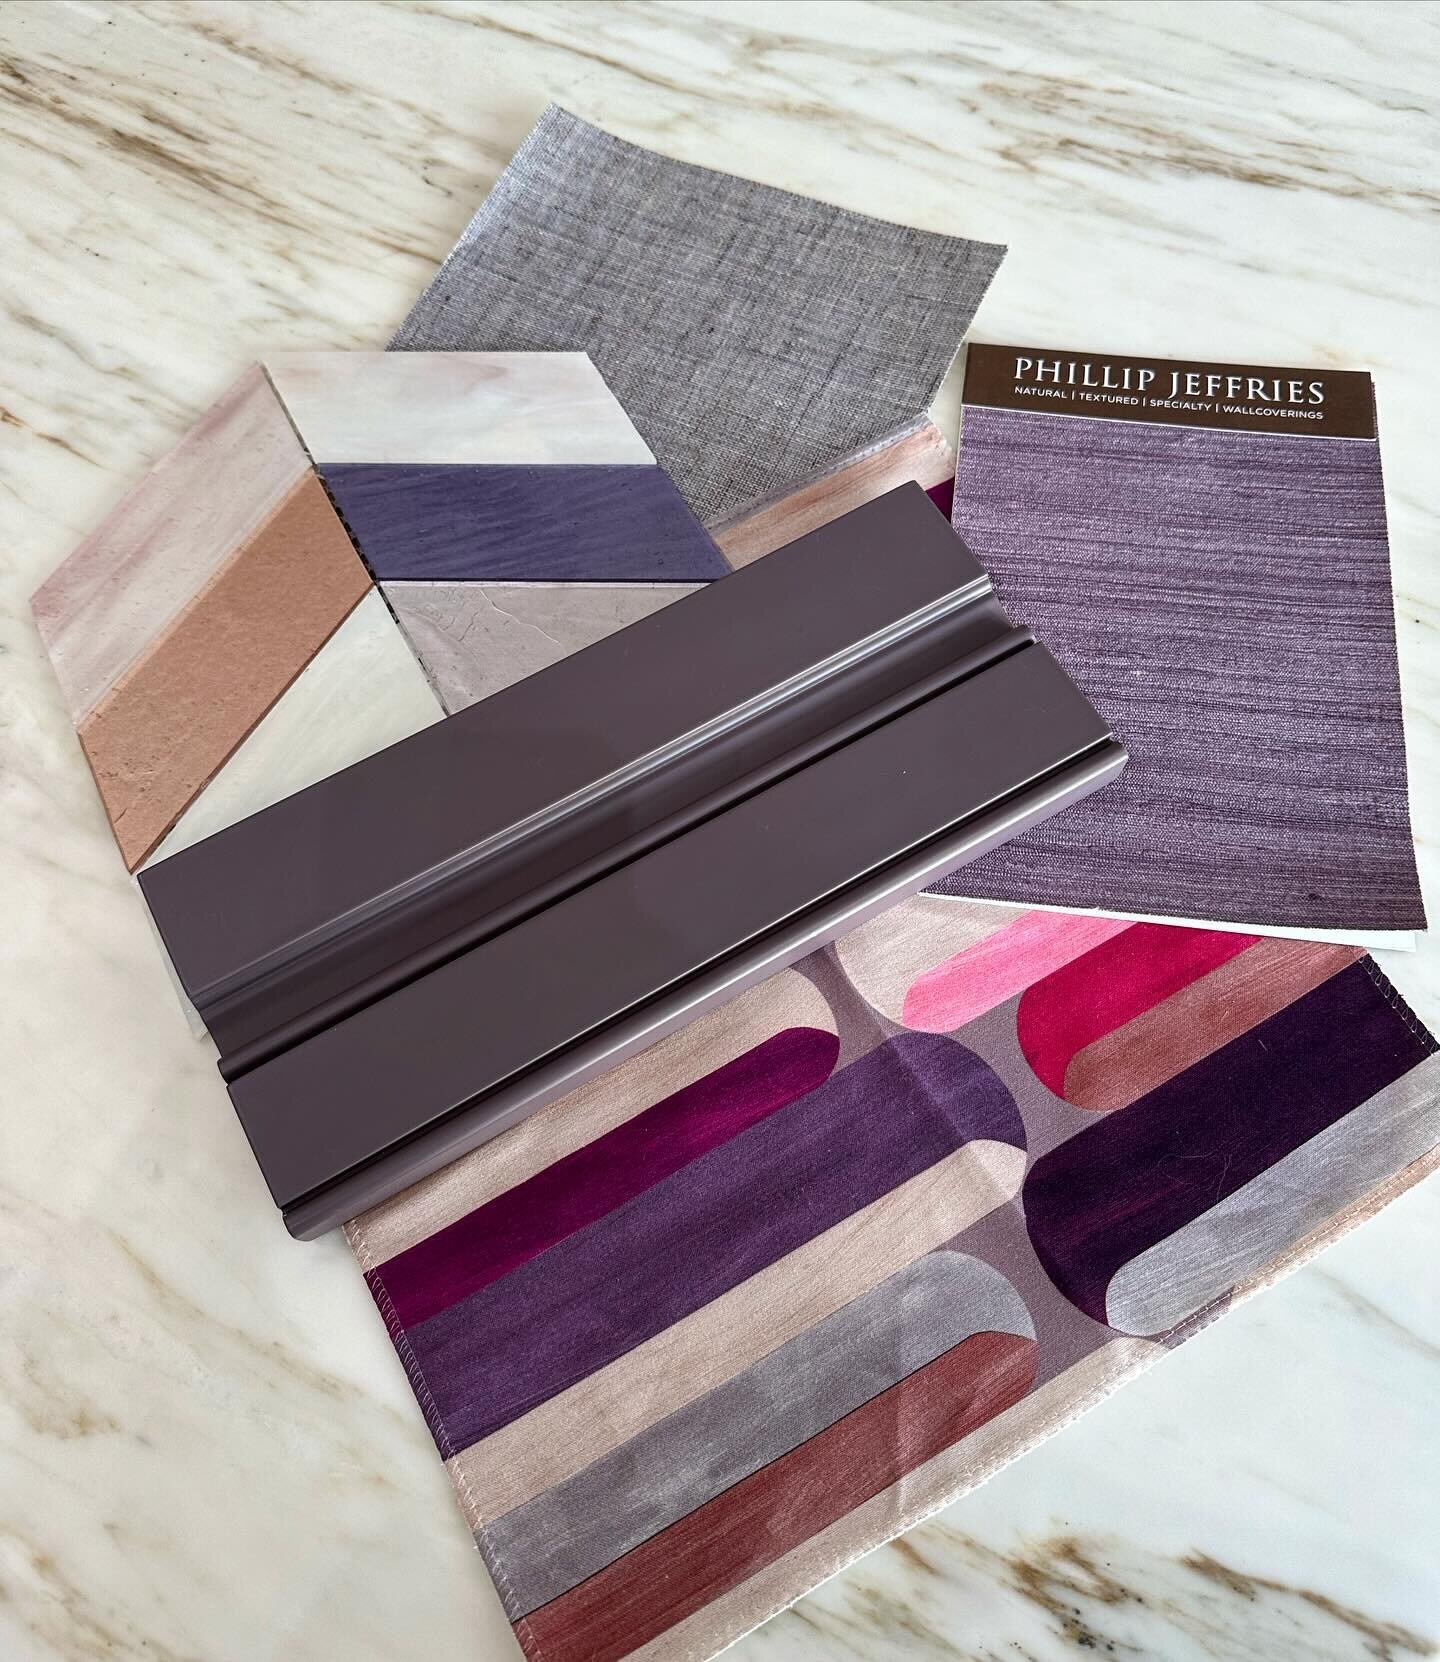 We heard news from Paris that maximalism is trending, so here we are prepared with some palettes that scream &ldquo;ETXRAAA✨&rdquo;
-
#interiordesign #interiorpalette #materialboard #materialpalette #furnishing #finishes #homedesign #residentialdesig